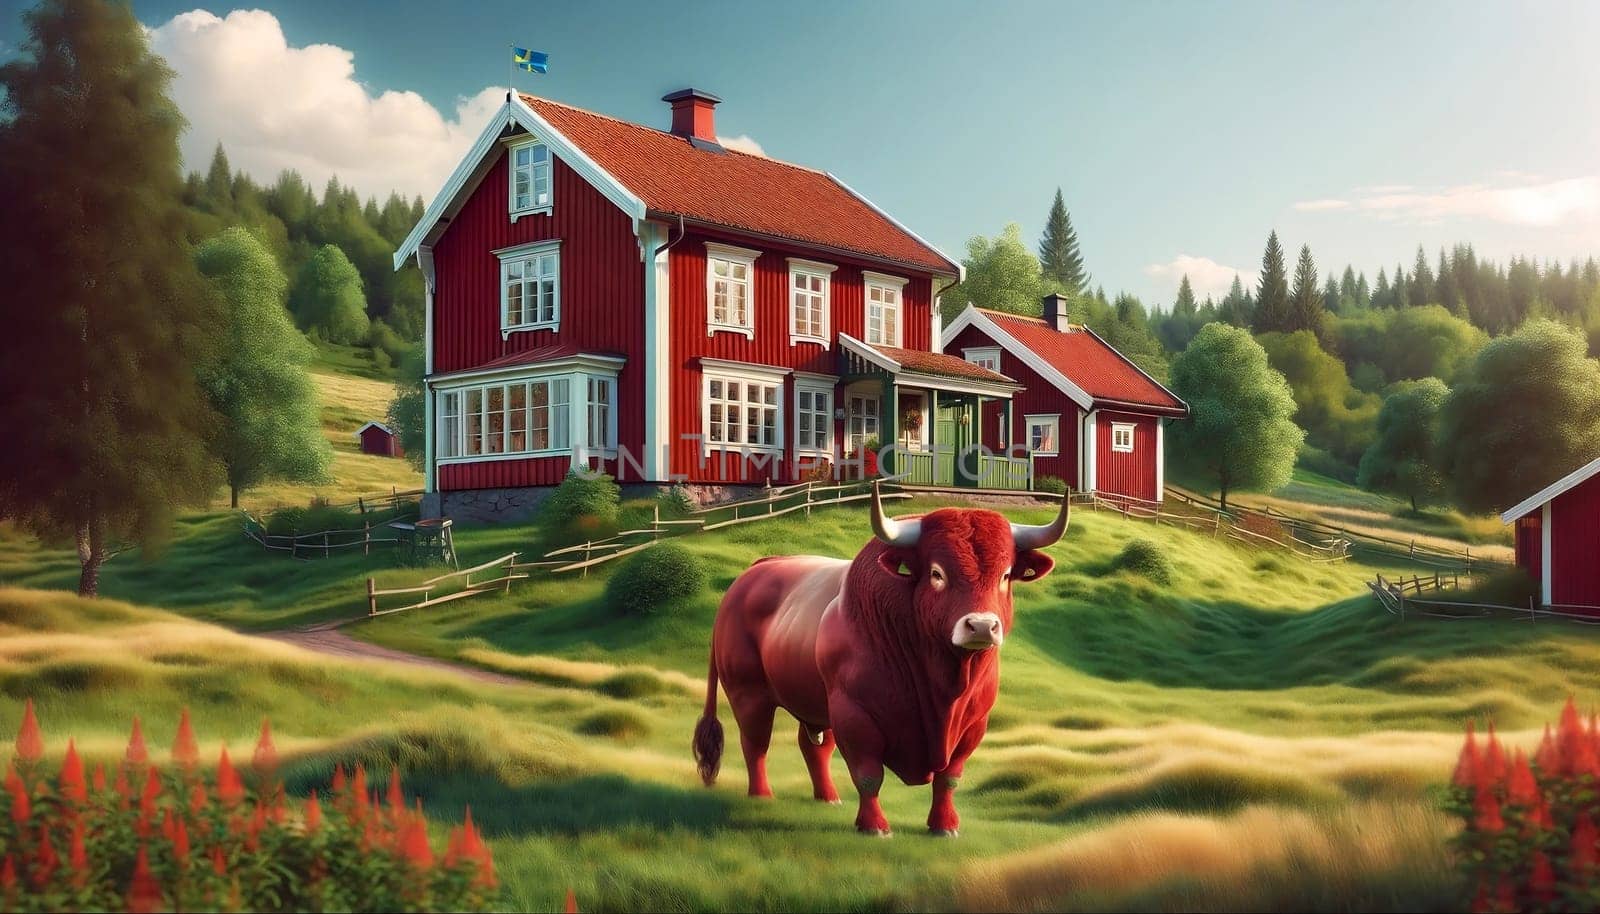 Symobol of Dalsland, a bull stands by a red house, also known as Dalslandsstuga by SweCreatives